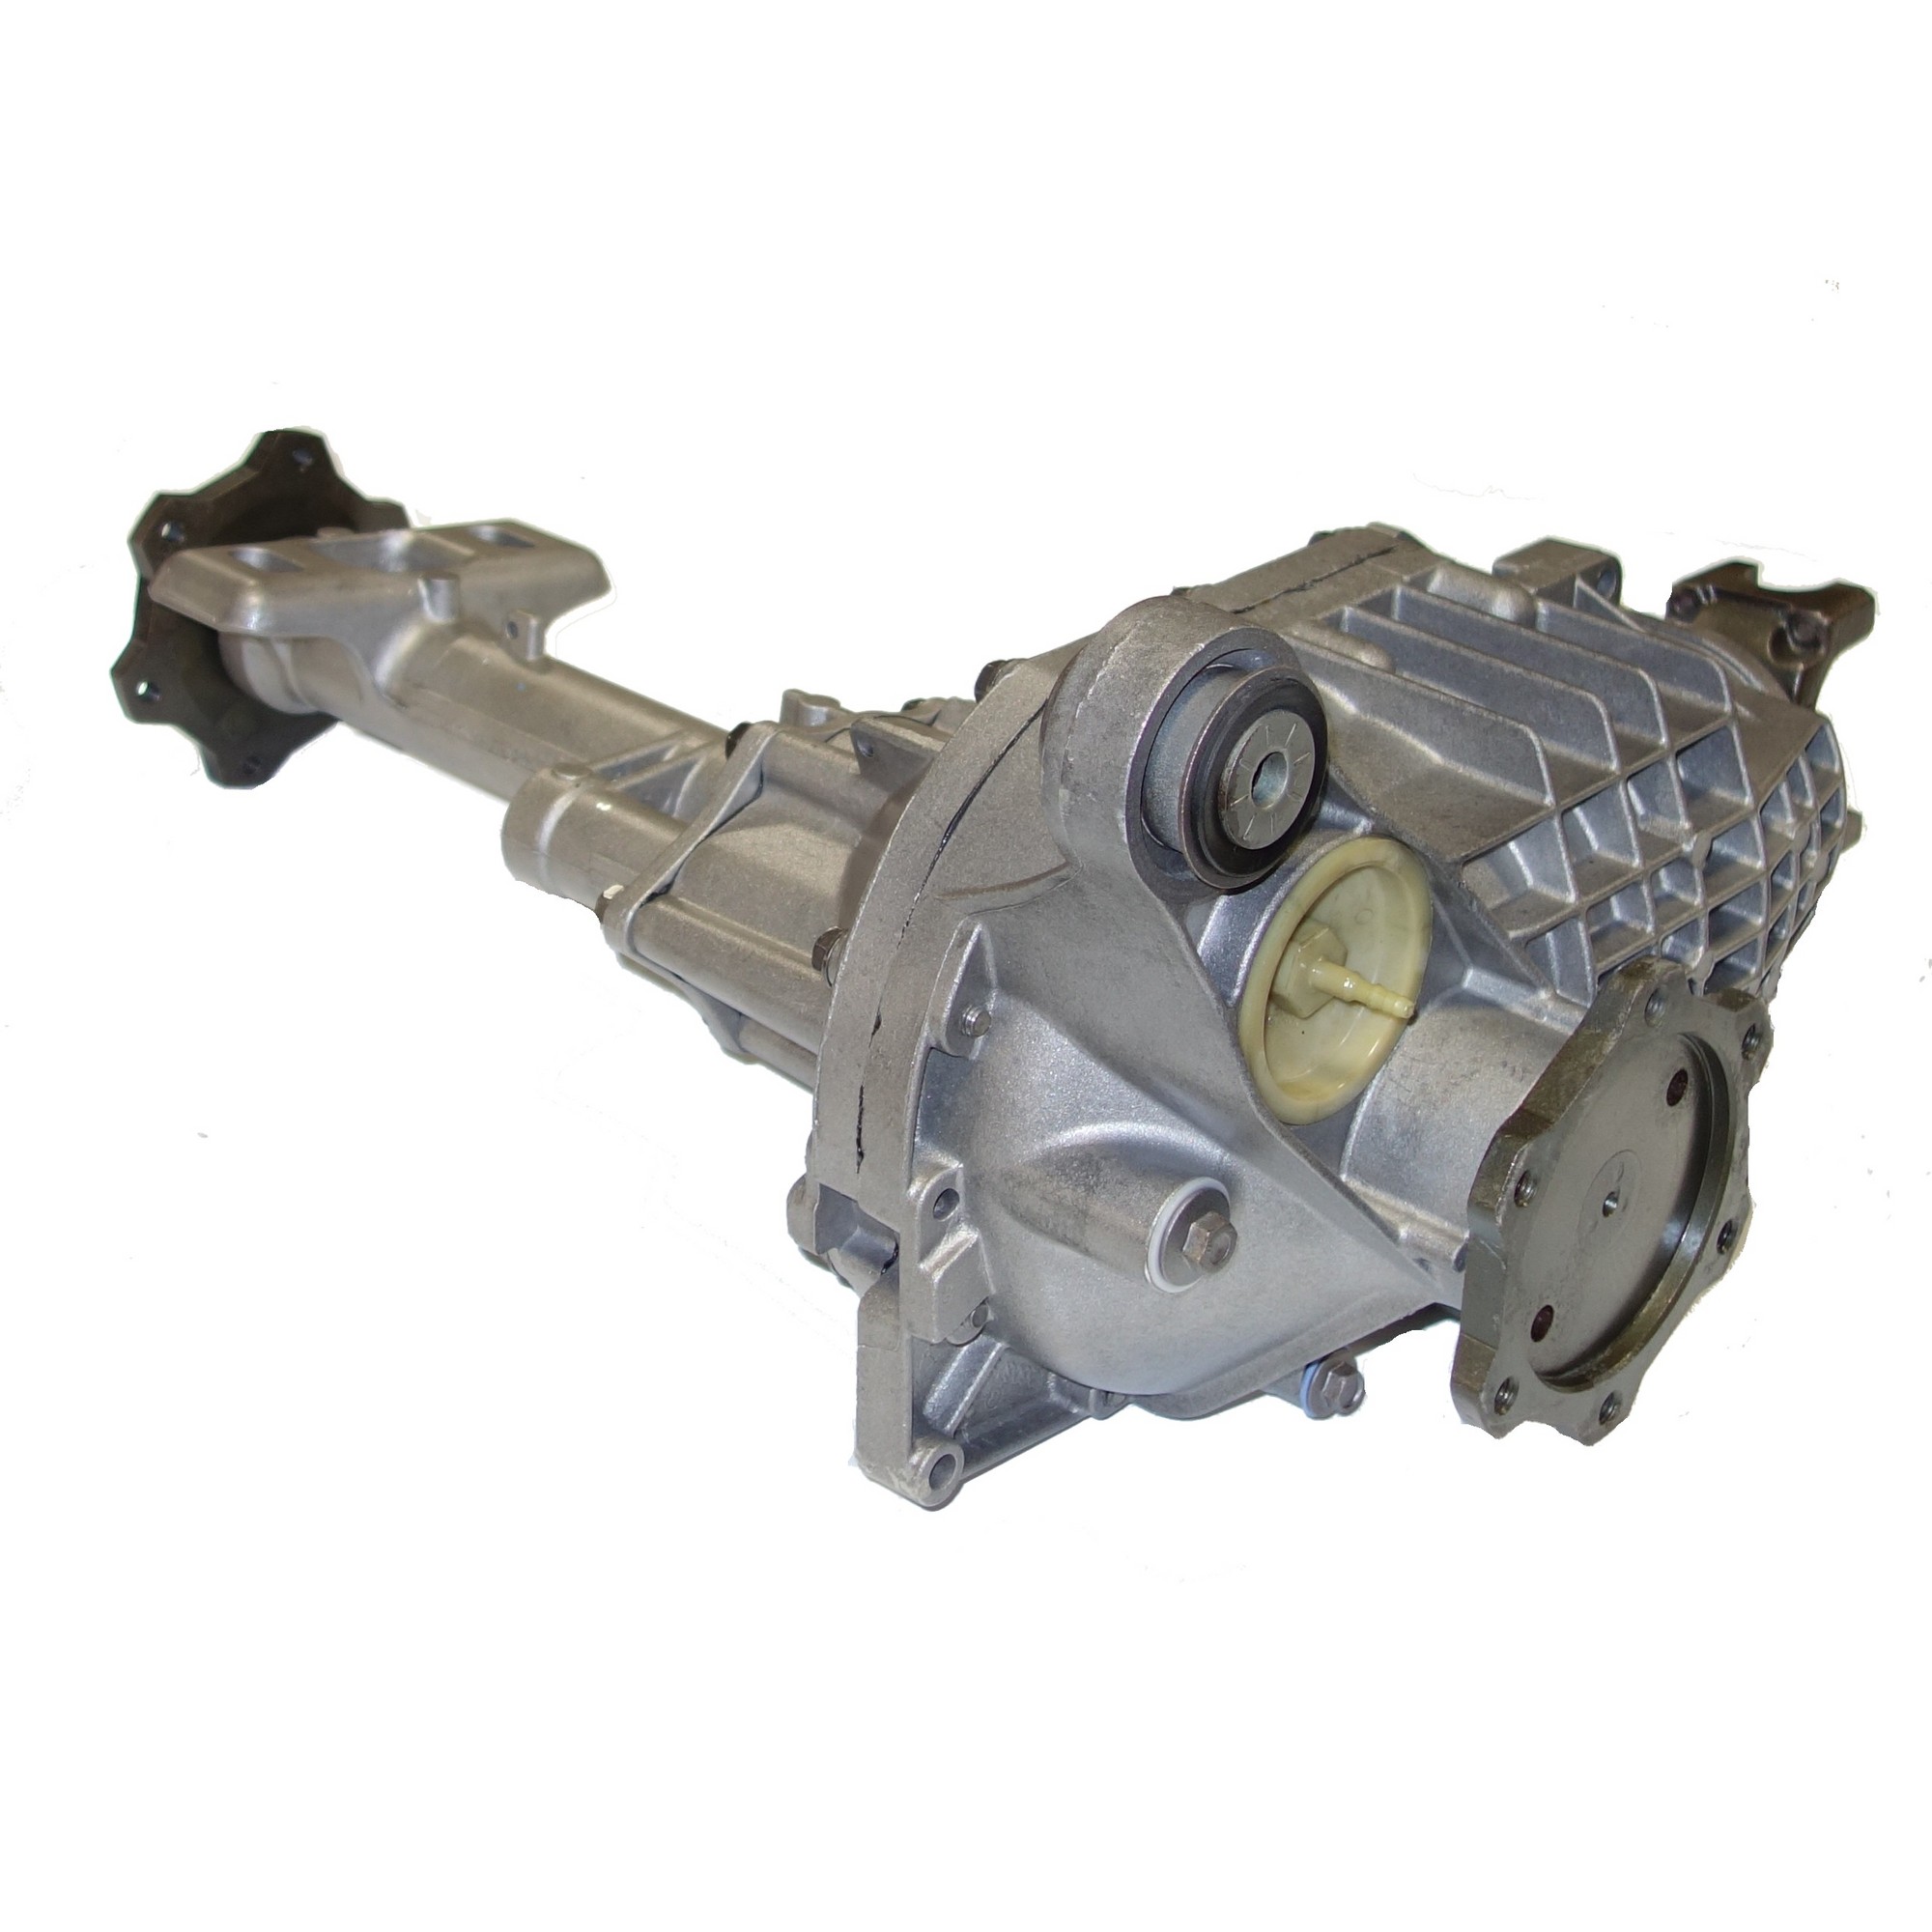 Remanufactured 8.25"IFS Front Axle Assembly, 1999-06 Silverado/Sierra 1500 & Full Size 1500 SUV, 3.73 Ratio